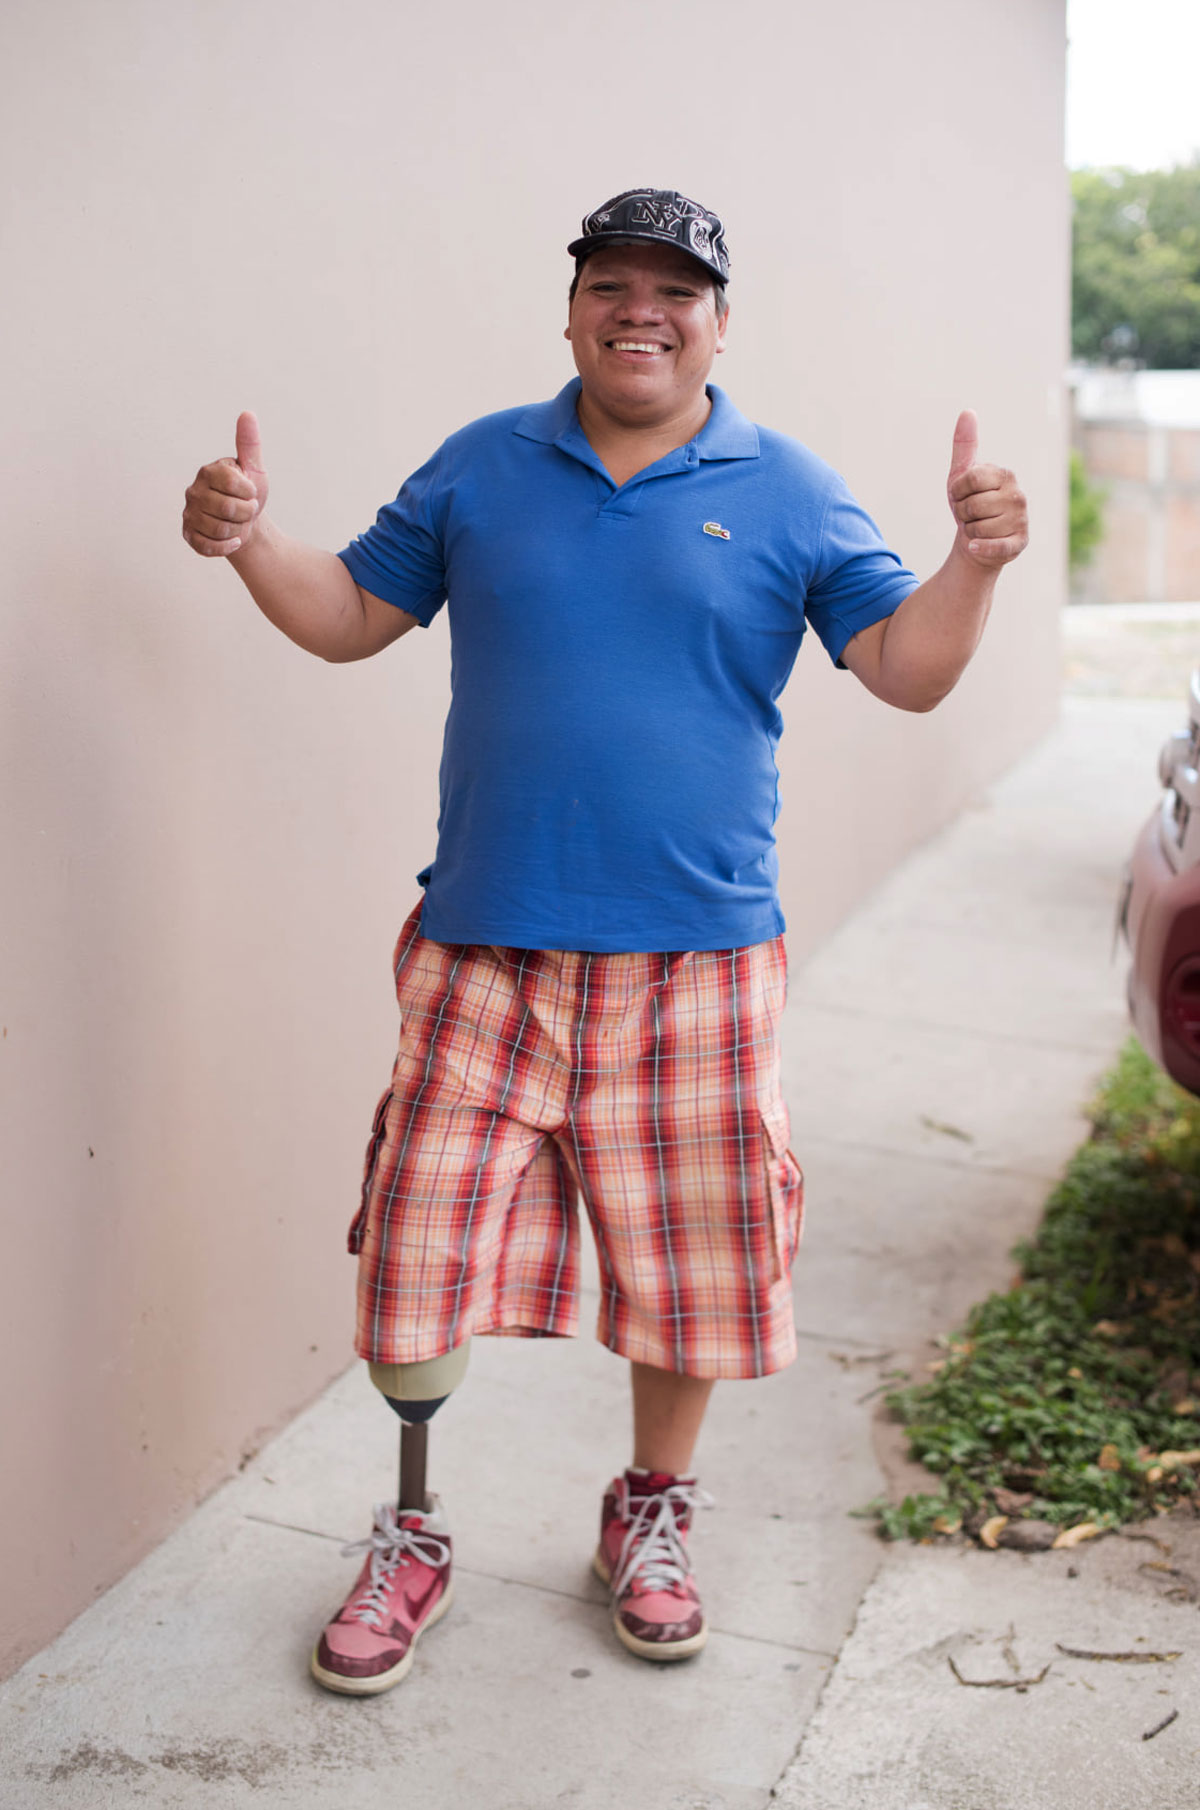 image of a man standing giving the thumbs up sign